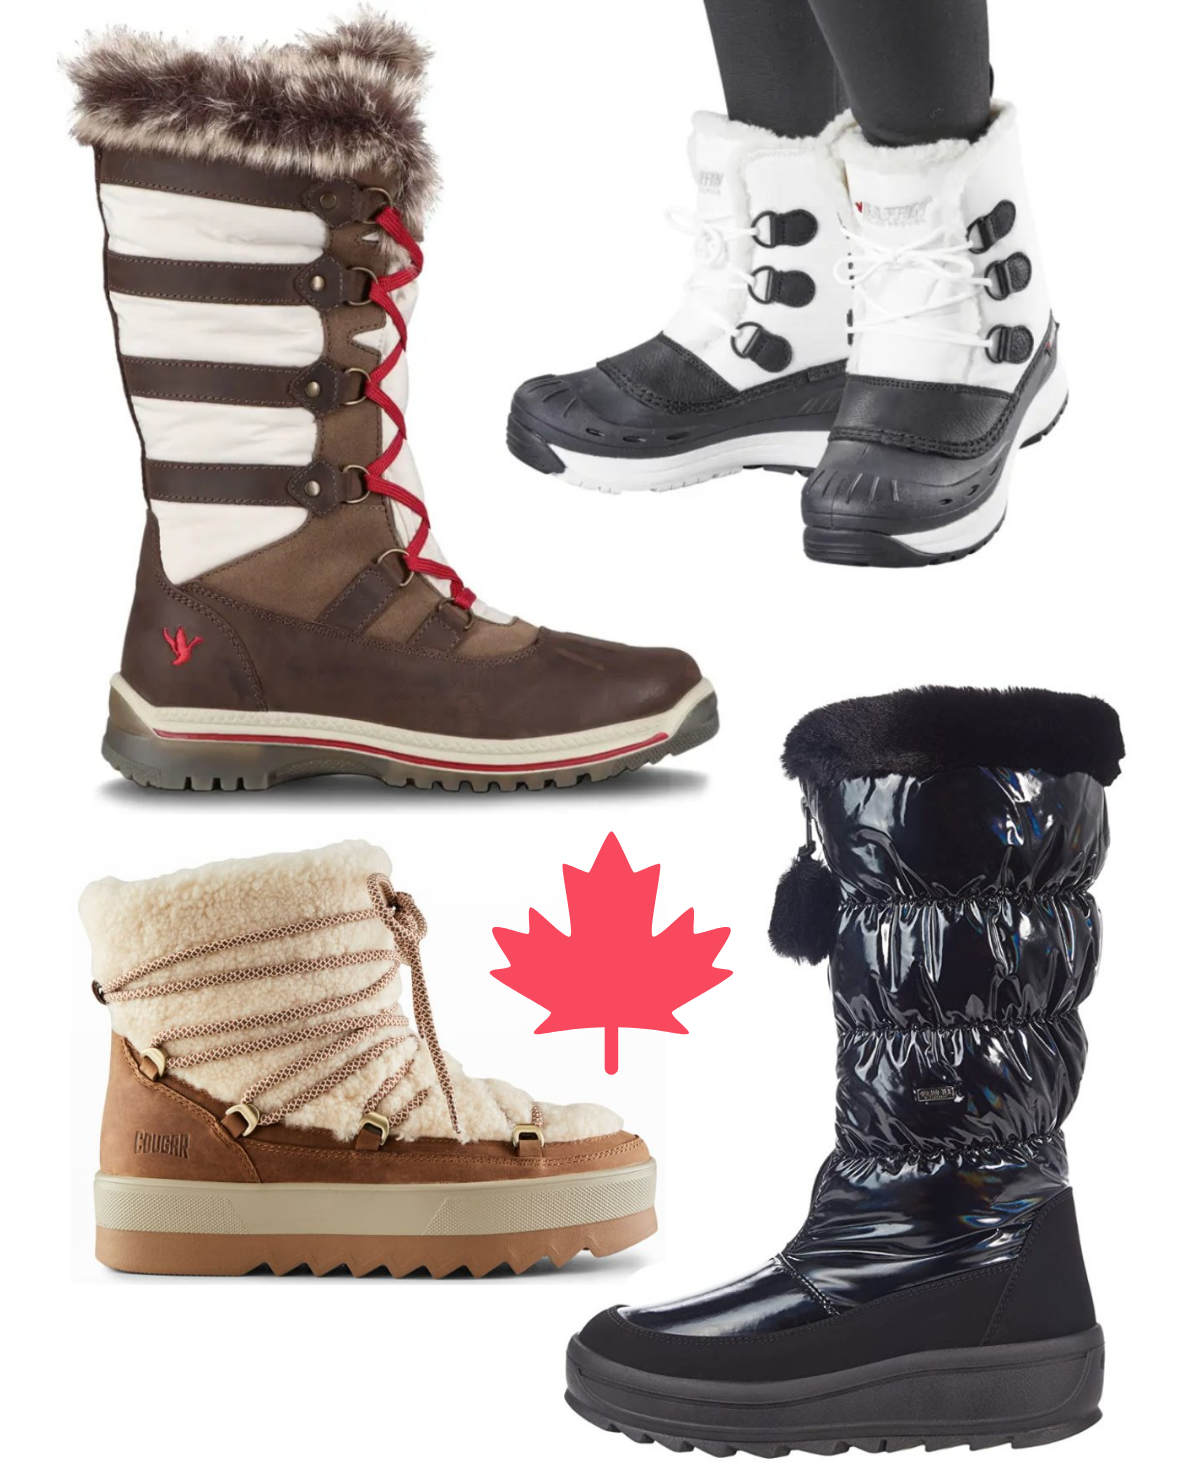 8 Best Canadian Winter Boots to Keep Warm in the Snow & Cold - 2022